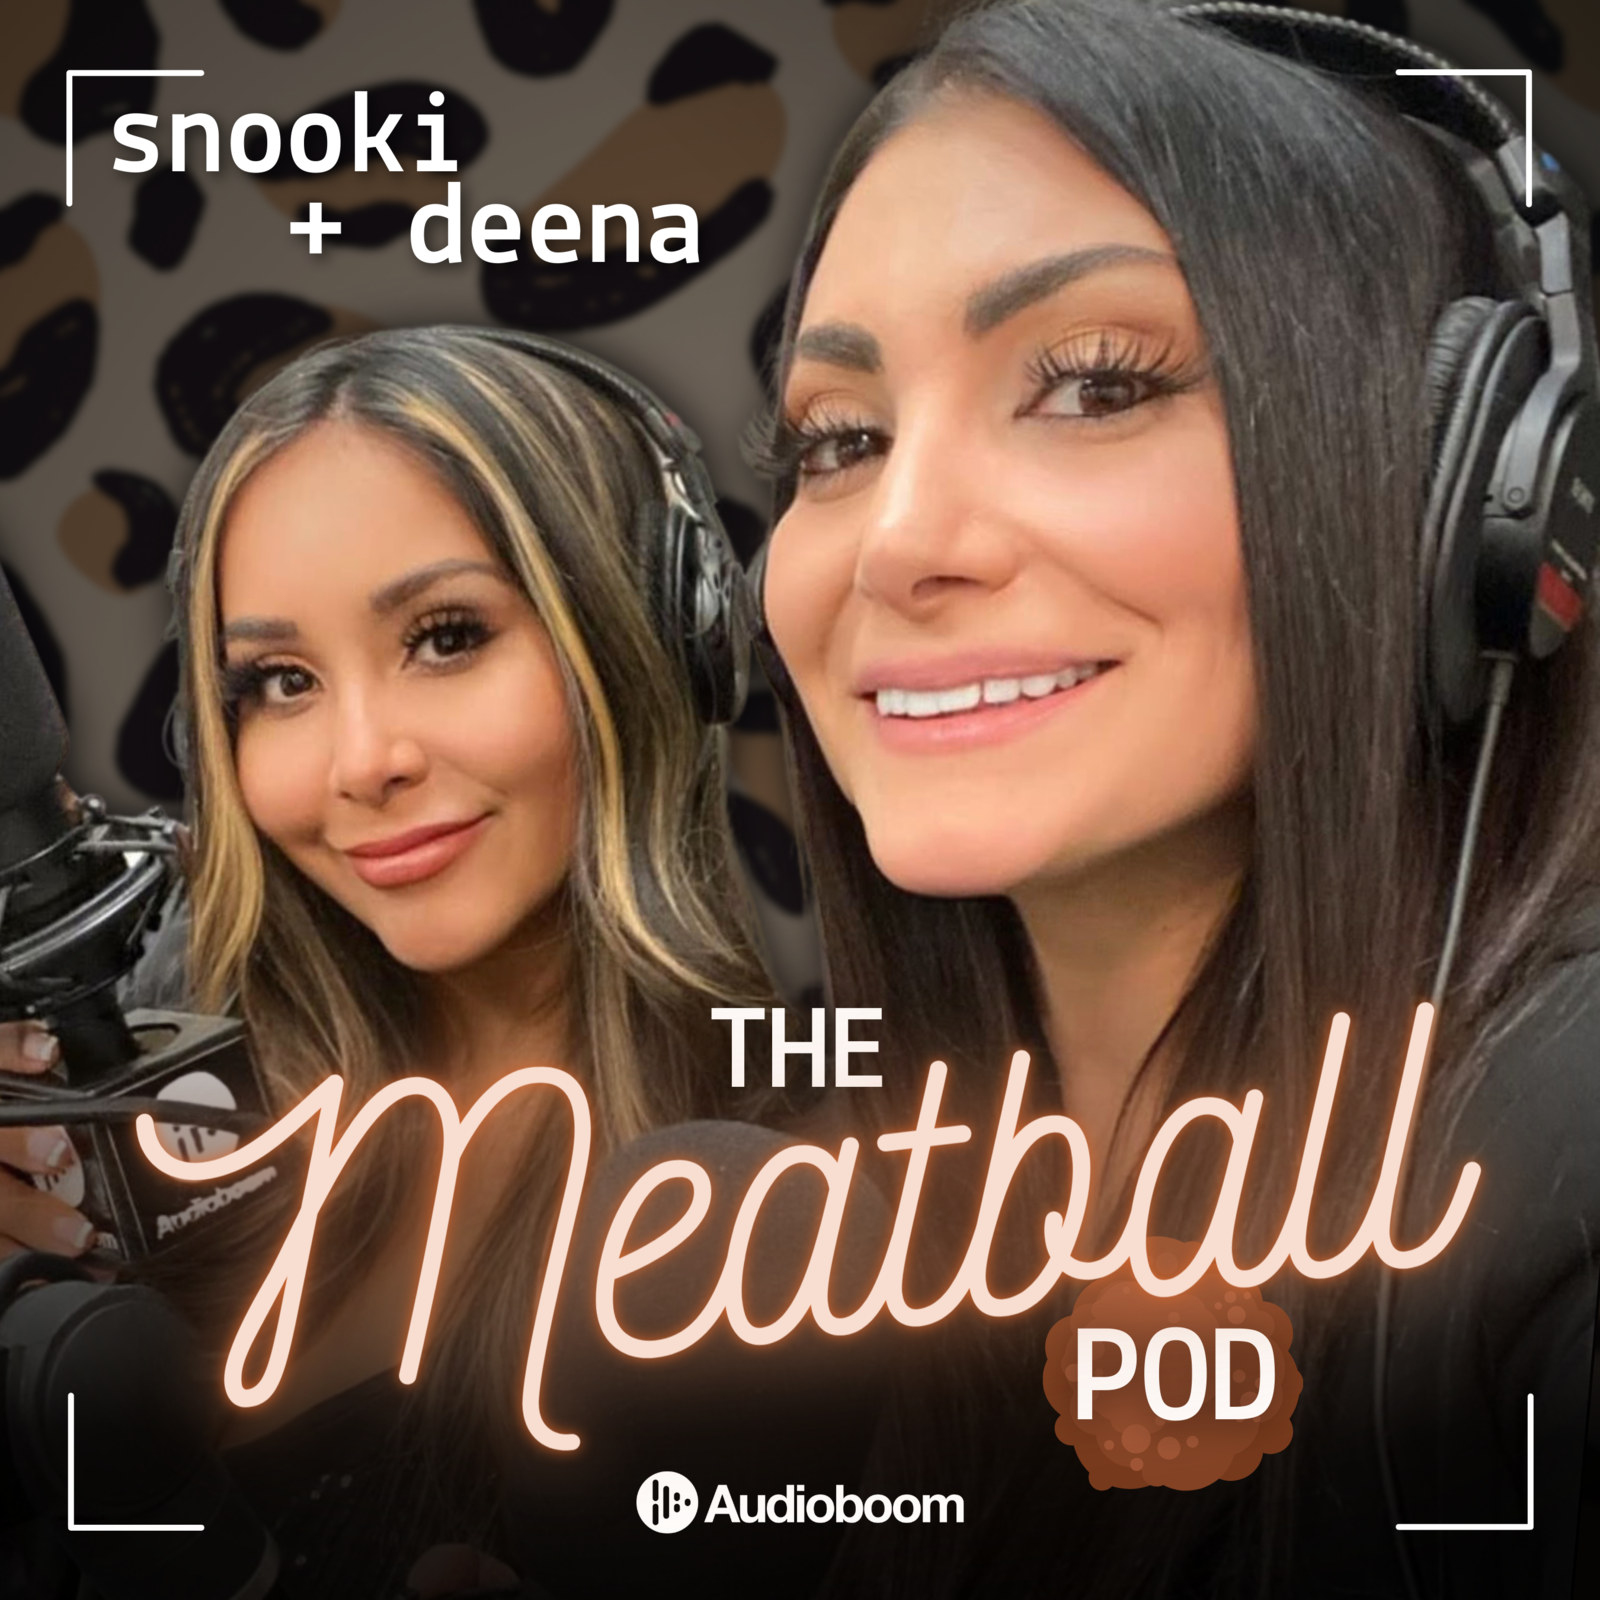 The Meatball Pod podcast show image